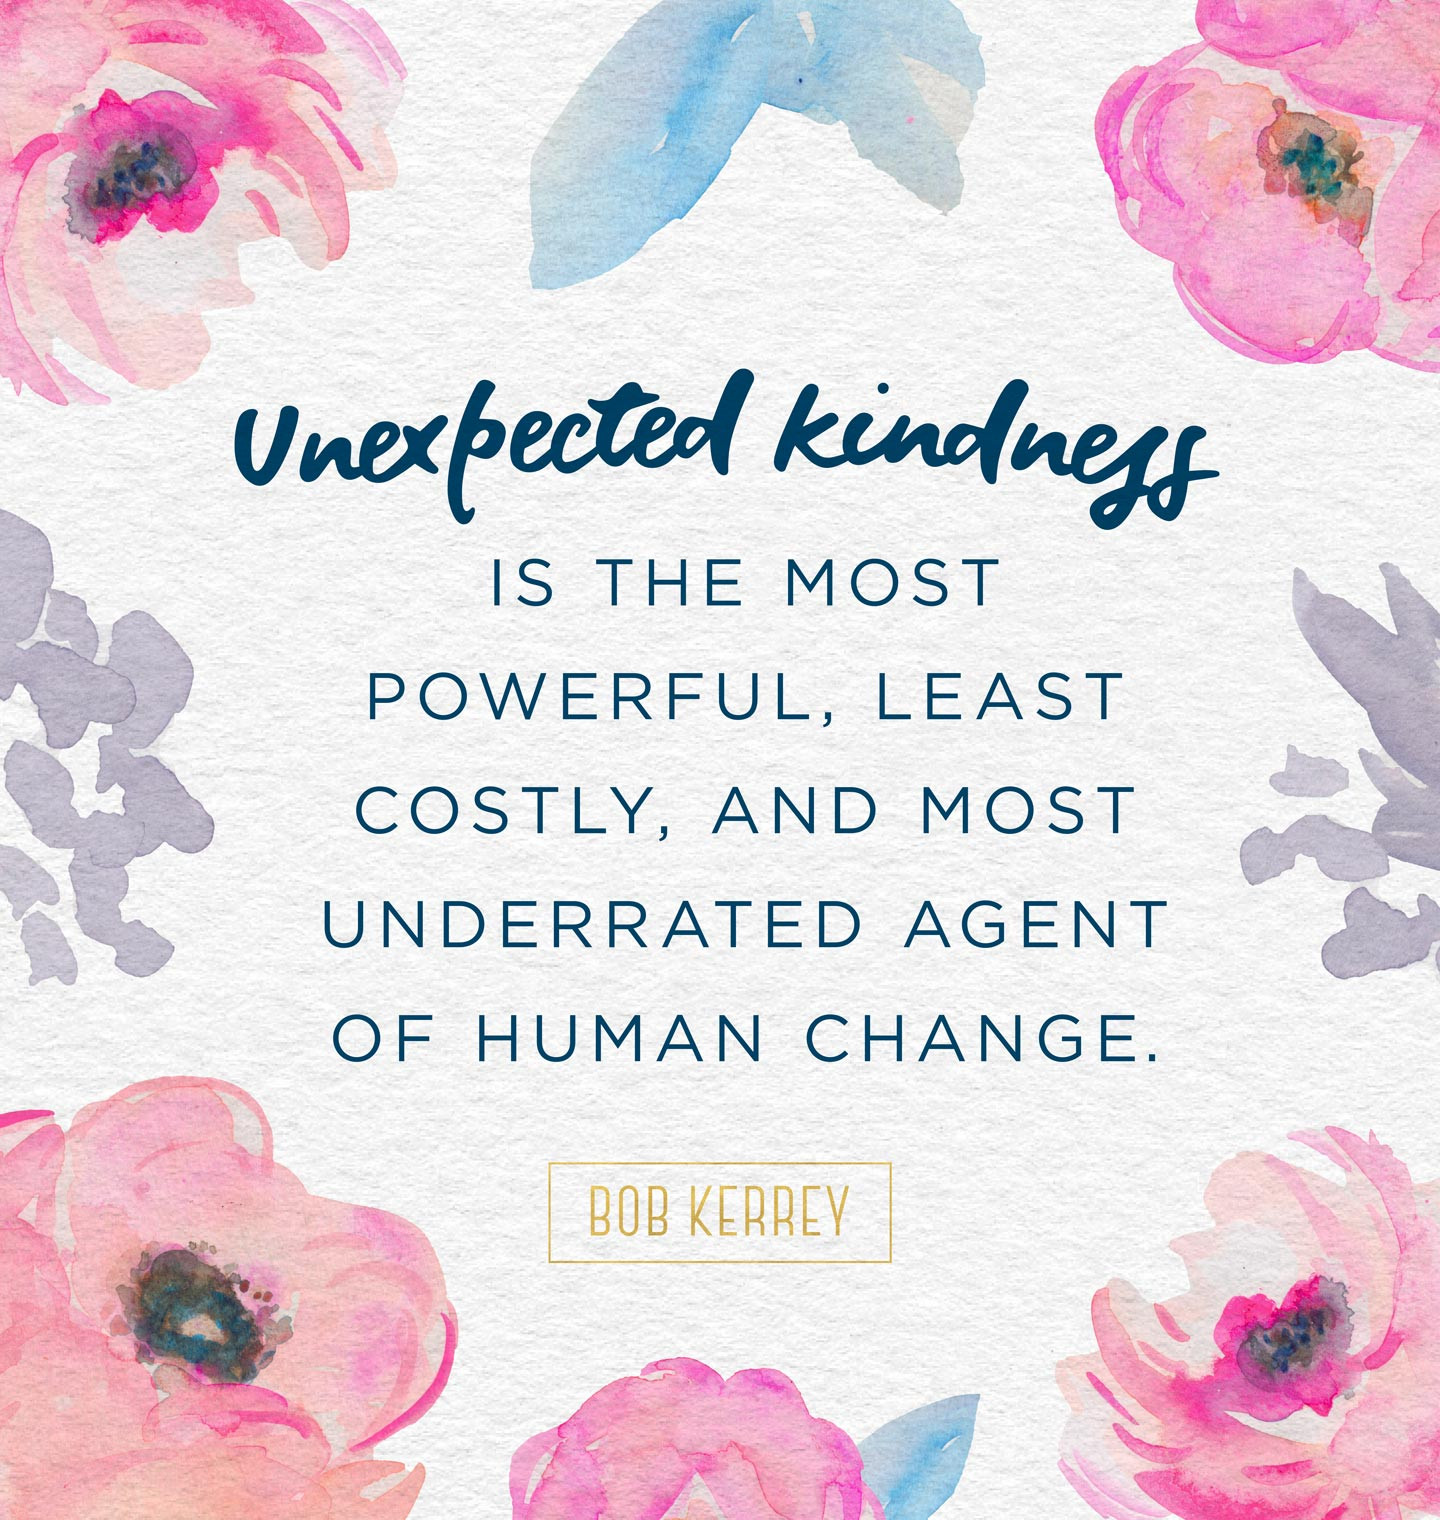 Quotes About Kindness And Compassion
 30 Inspiring Kindness Quotes That Will Enlighten You FTD